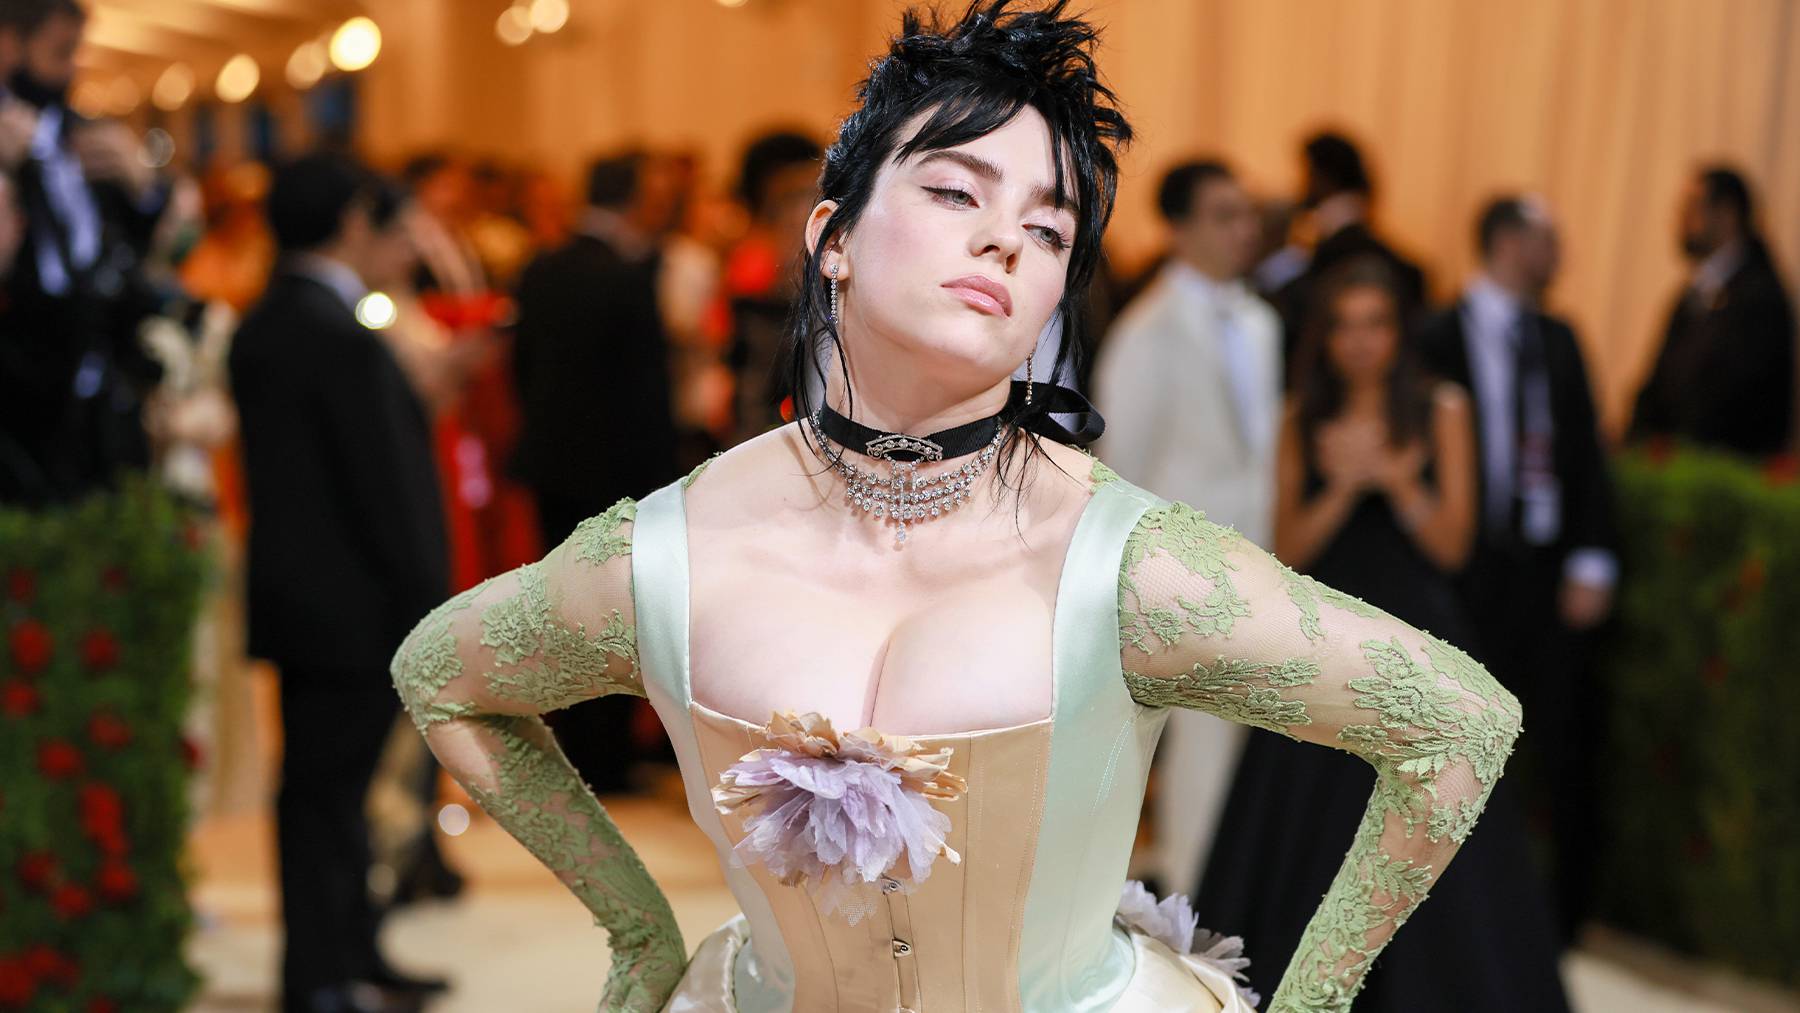 Billie Eilish attends The 2022 Met Gala in a Gucci corset made from deadstock materials.